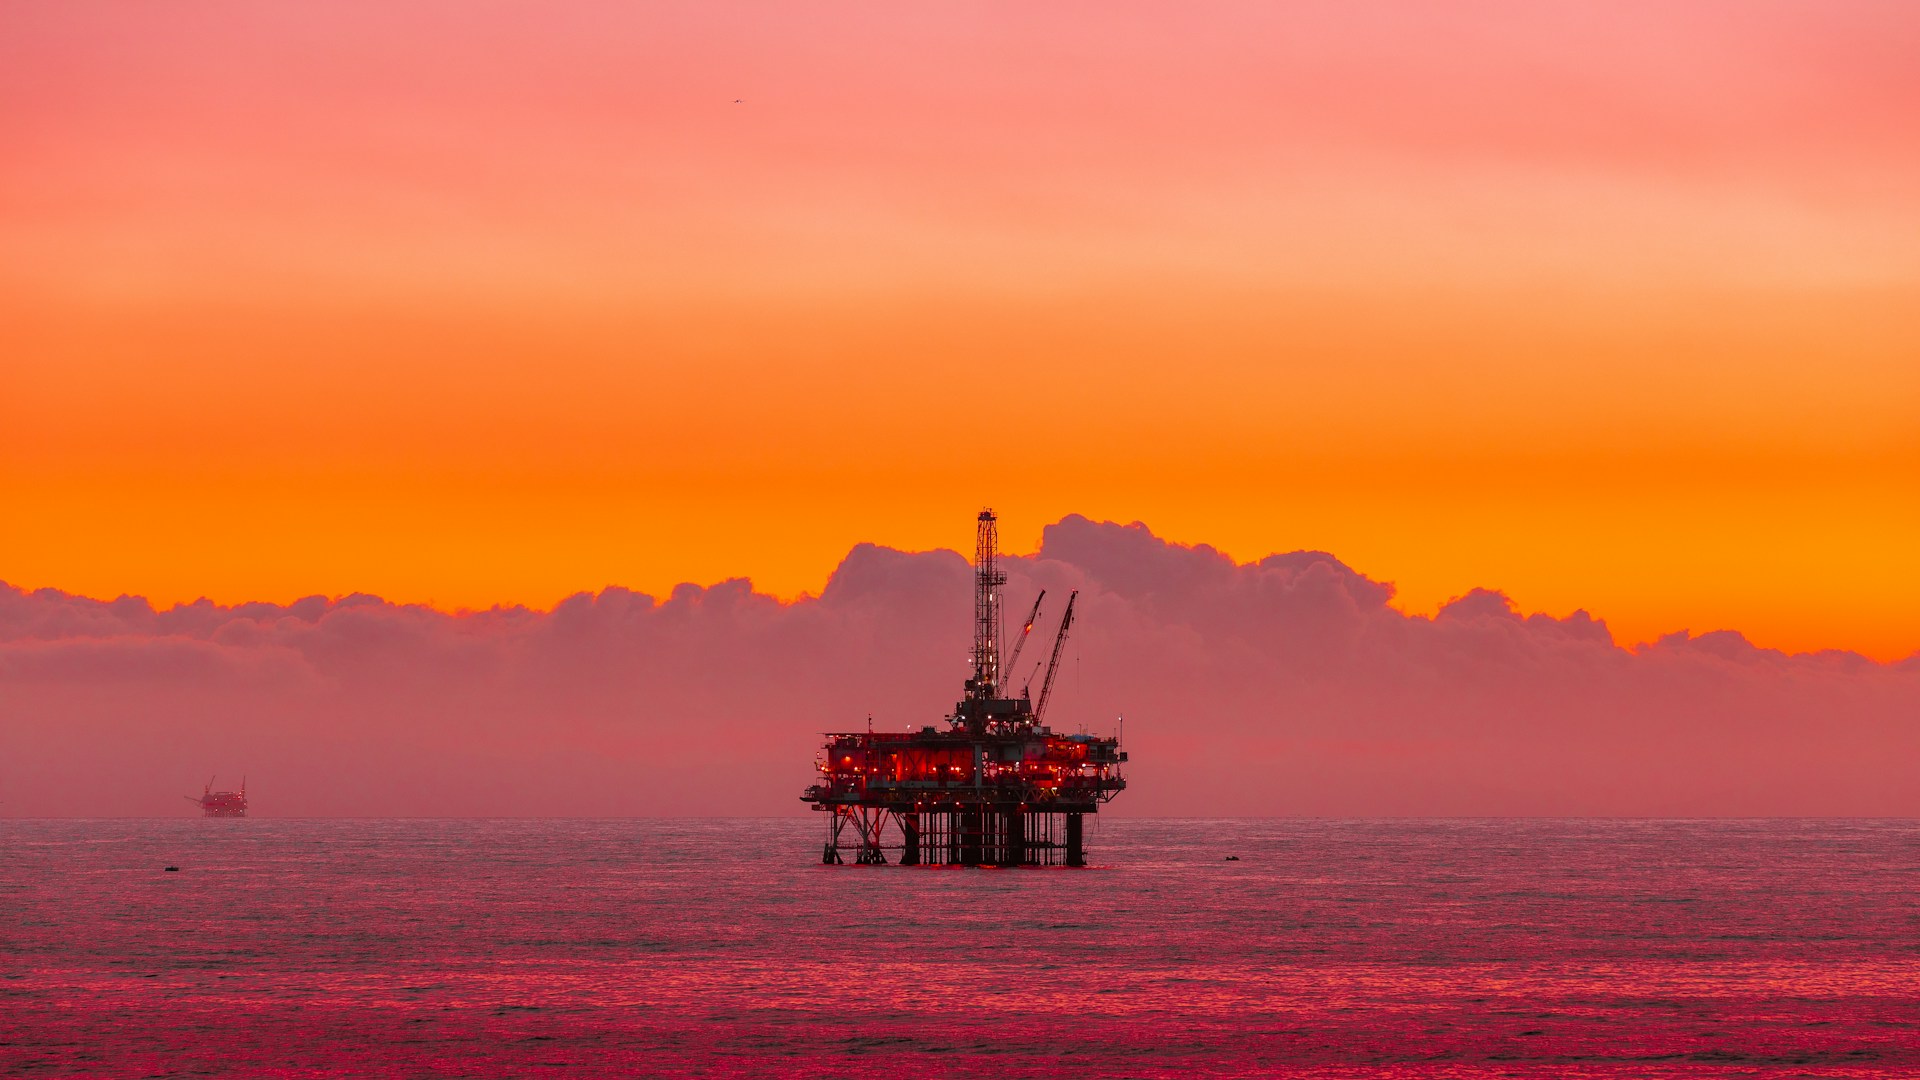 An offshore oil rig under a pink and orange sunset